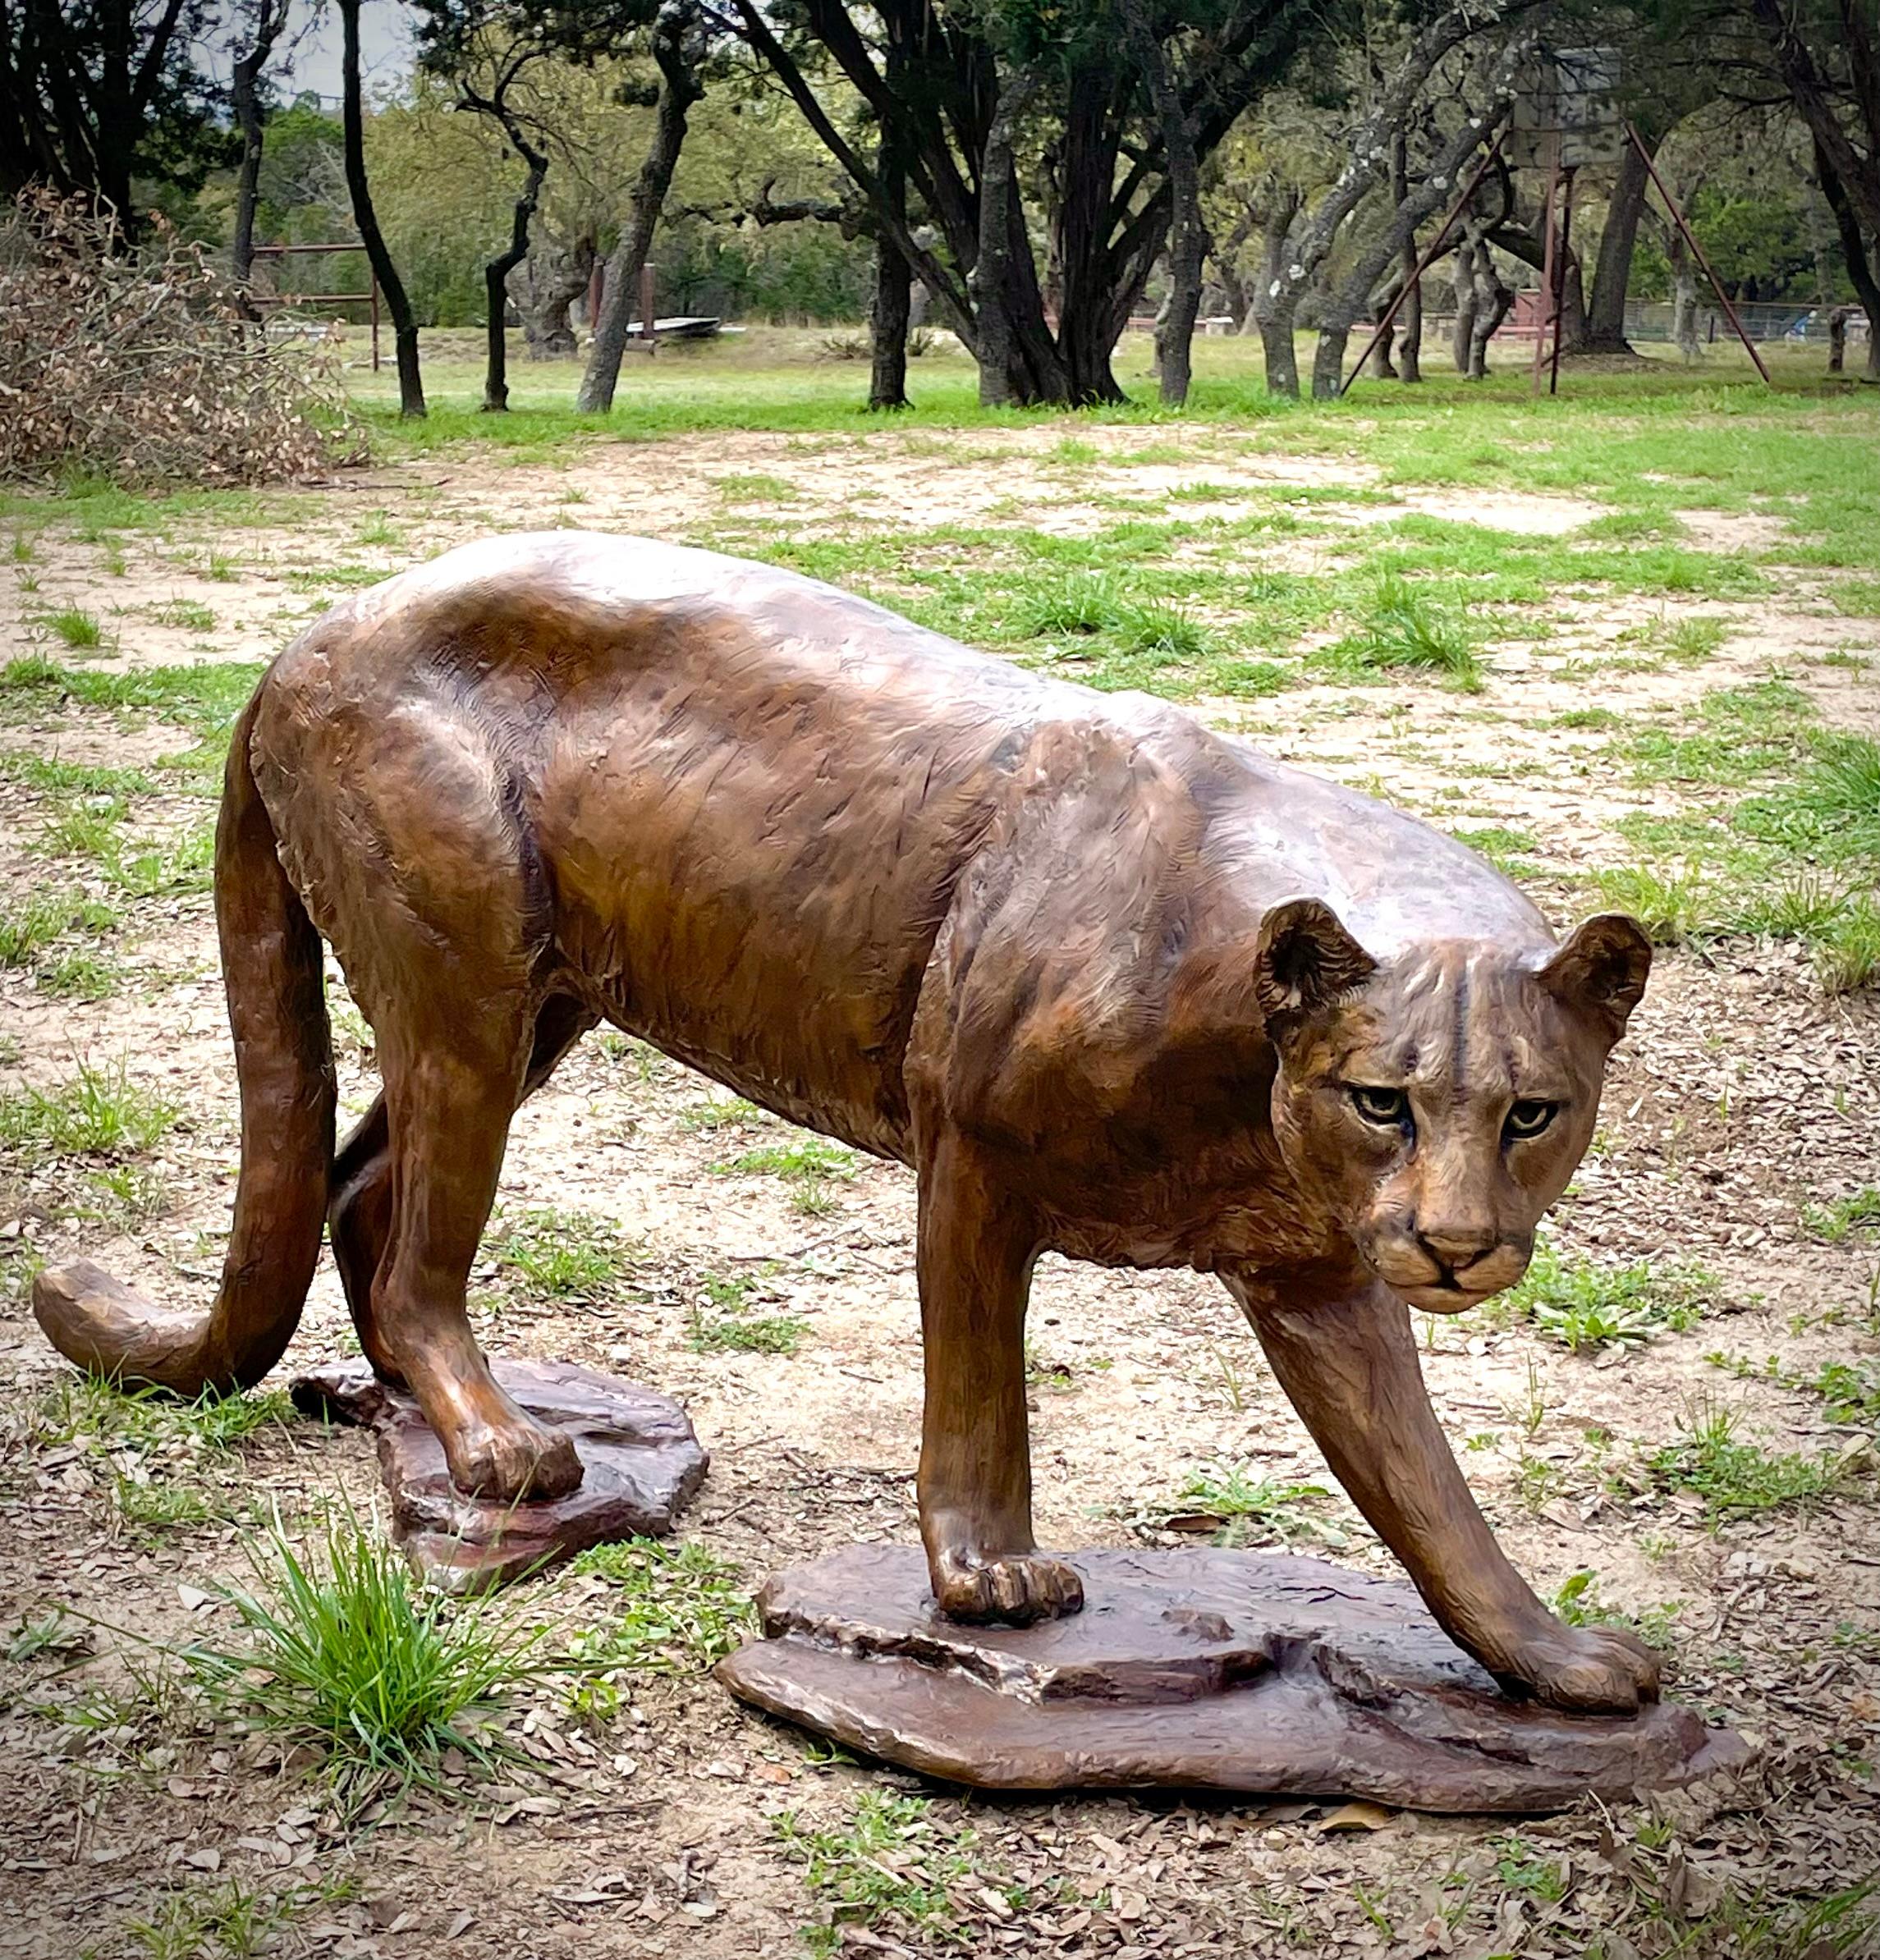 Scy Figurative Sculpture - "COUGAR" MOUNTAIN LION LIFE SIZE AWESOME.  KEEPS THE CRITTERS OUT OF YOUR YARD!!